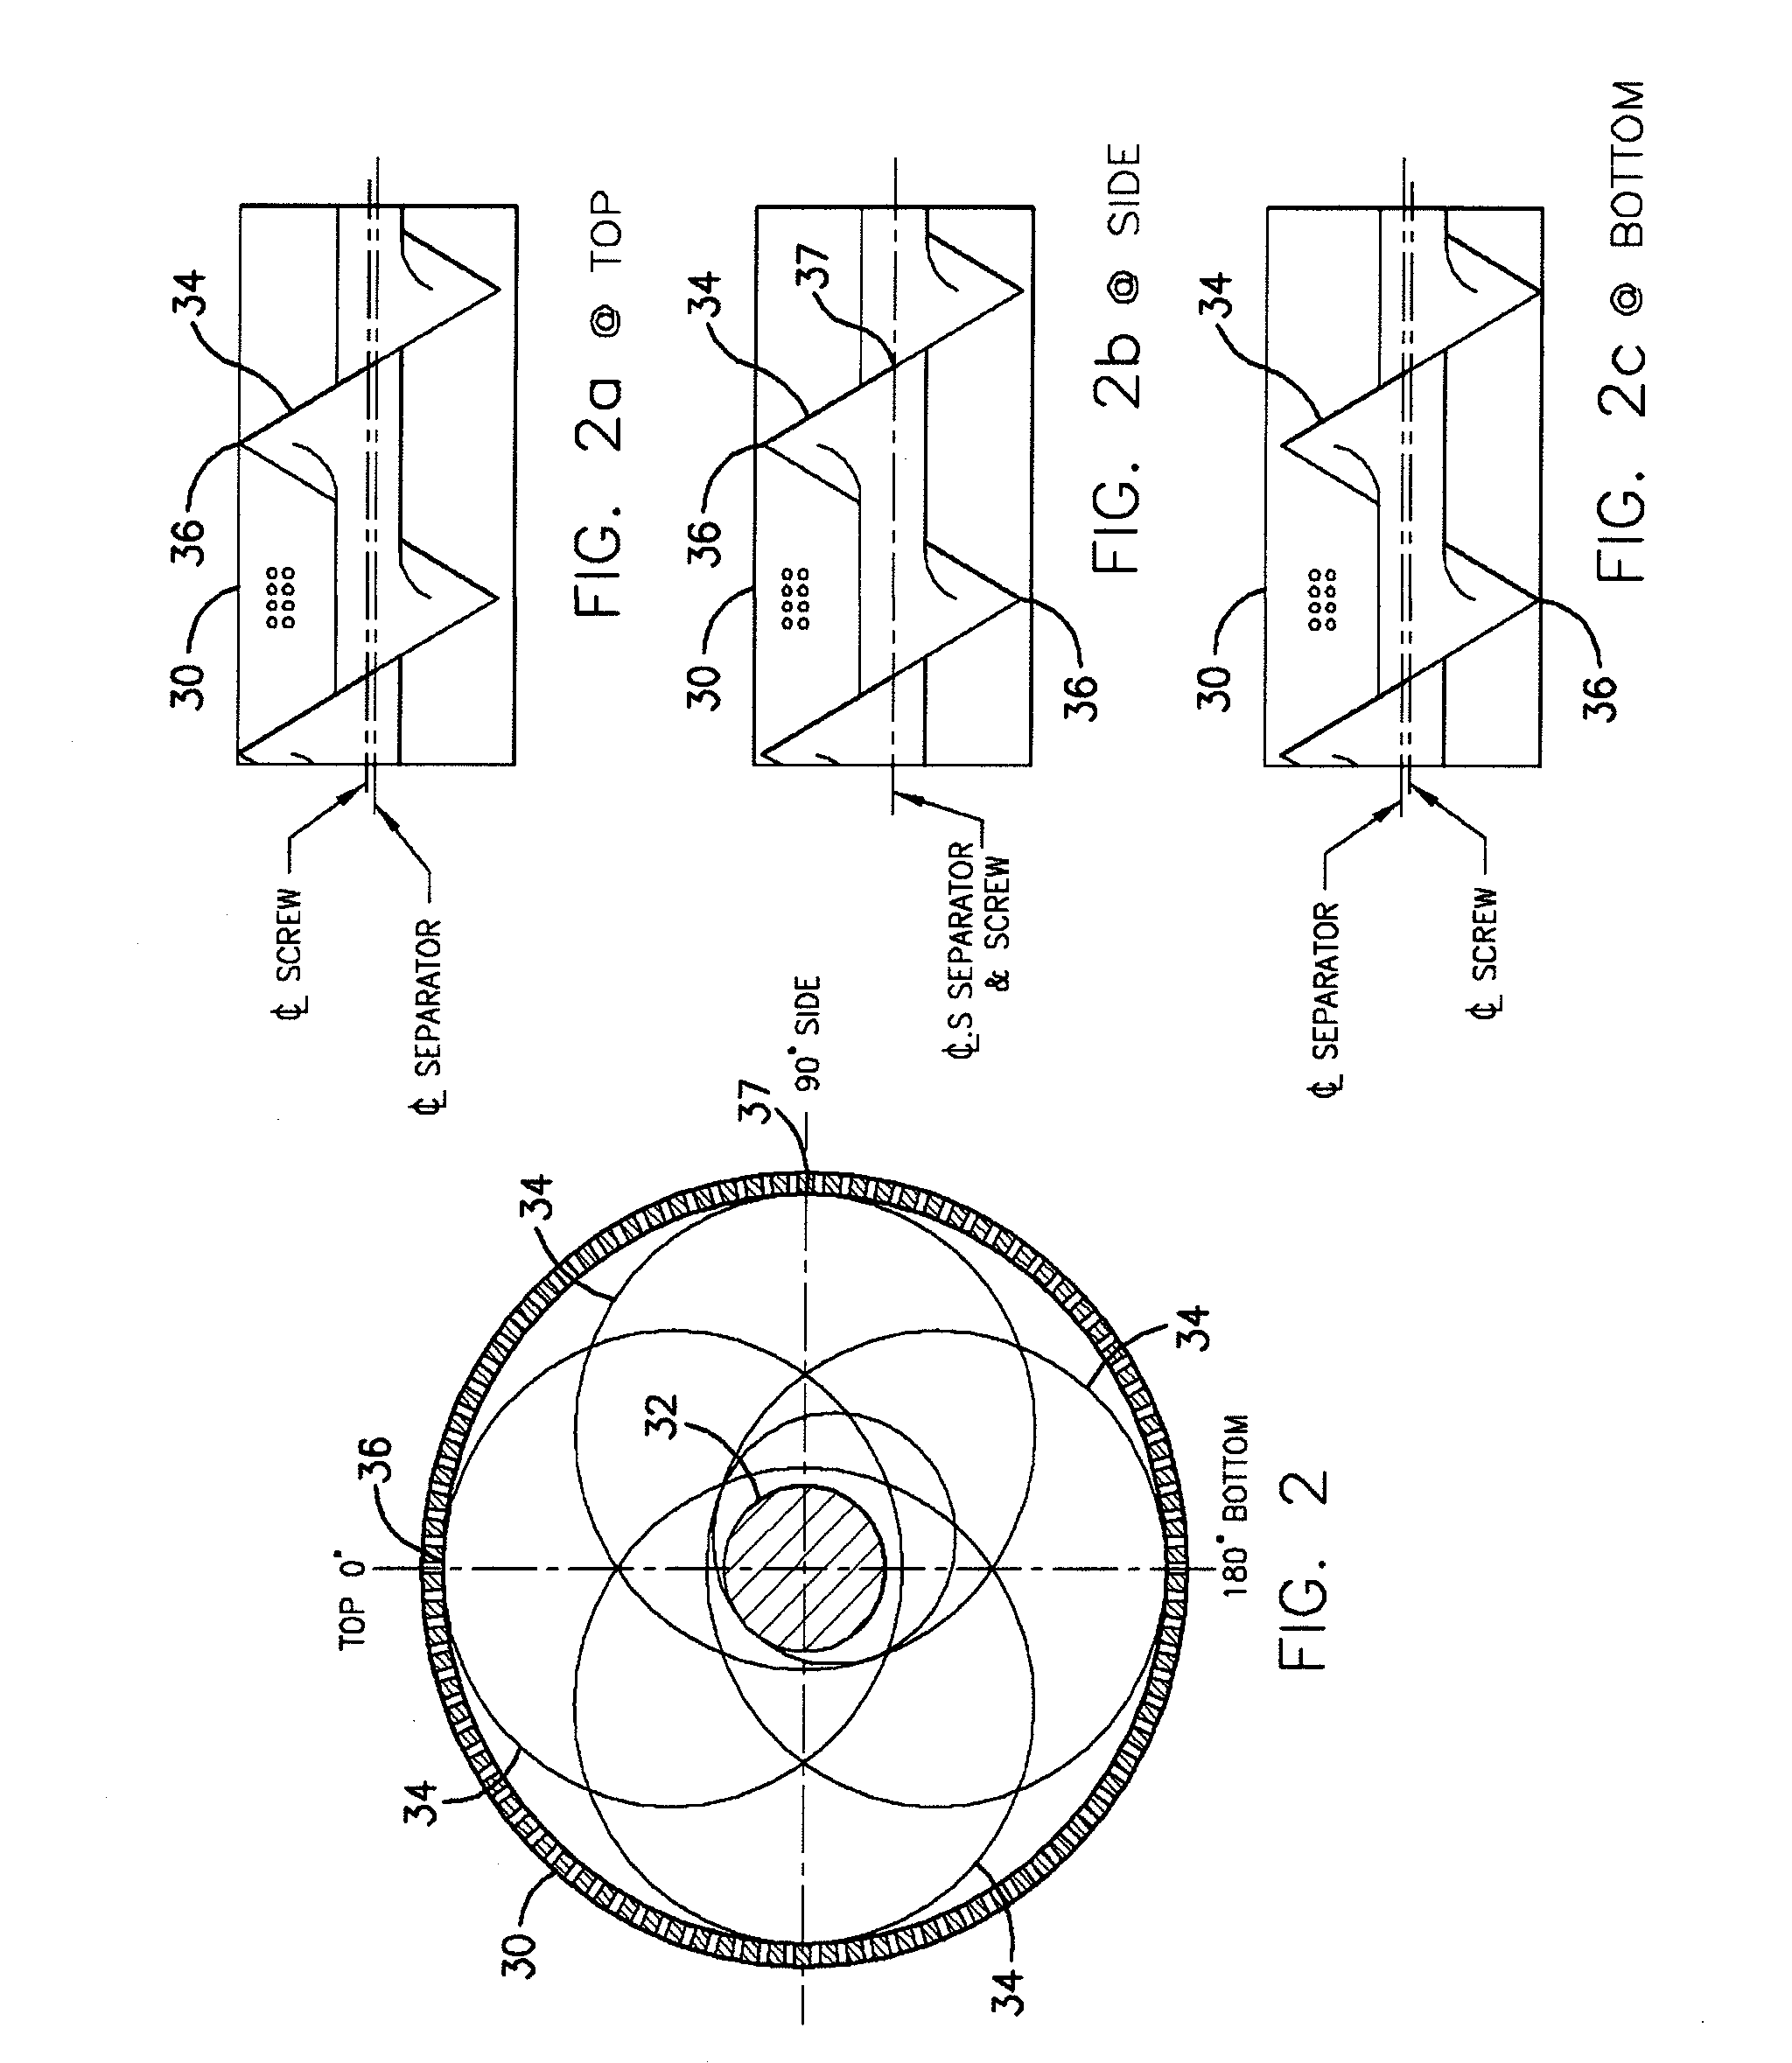 Apparatus and Method for Adjusting Clearance between a Screw and Screen in a Machine for Separating Composite Materials